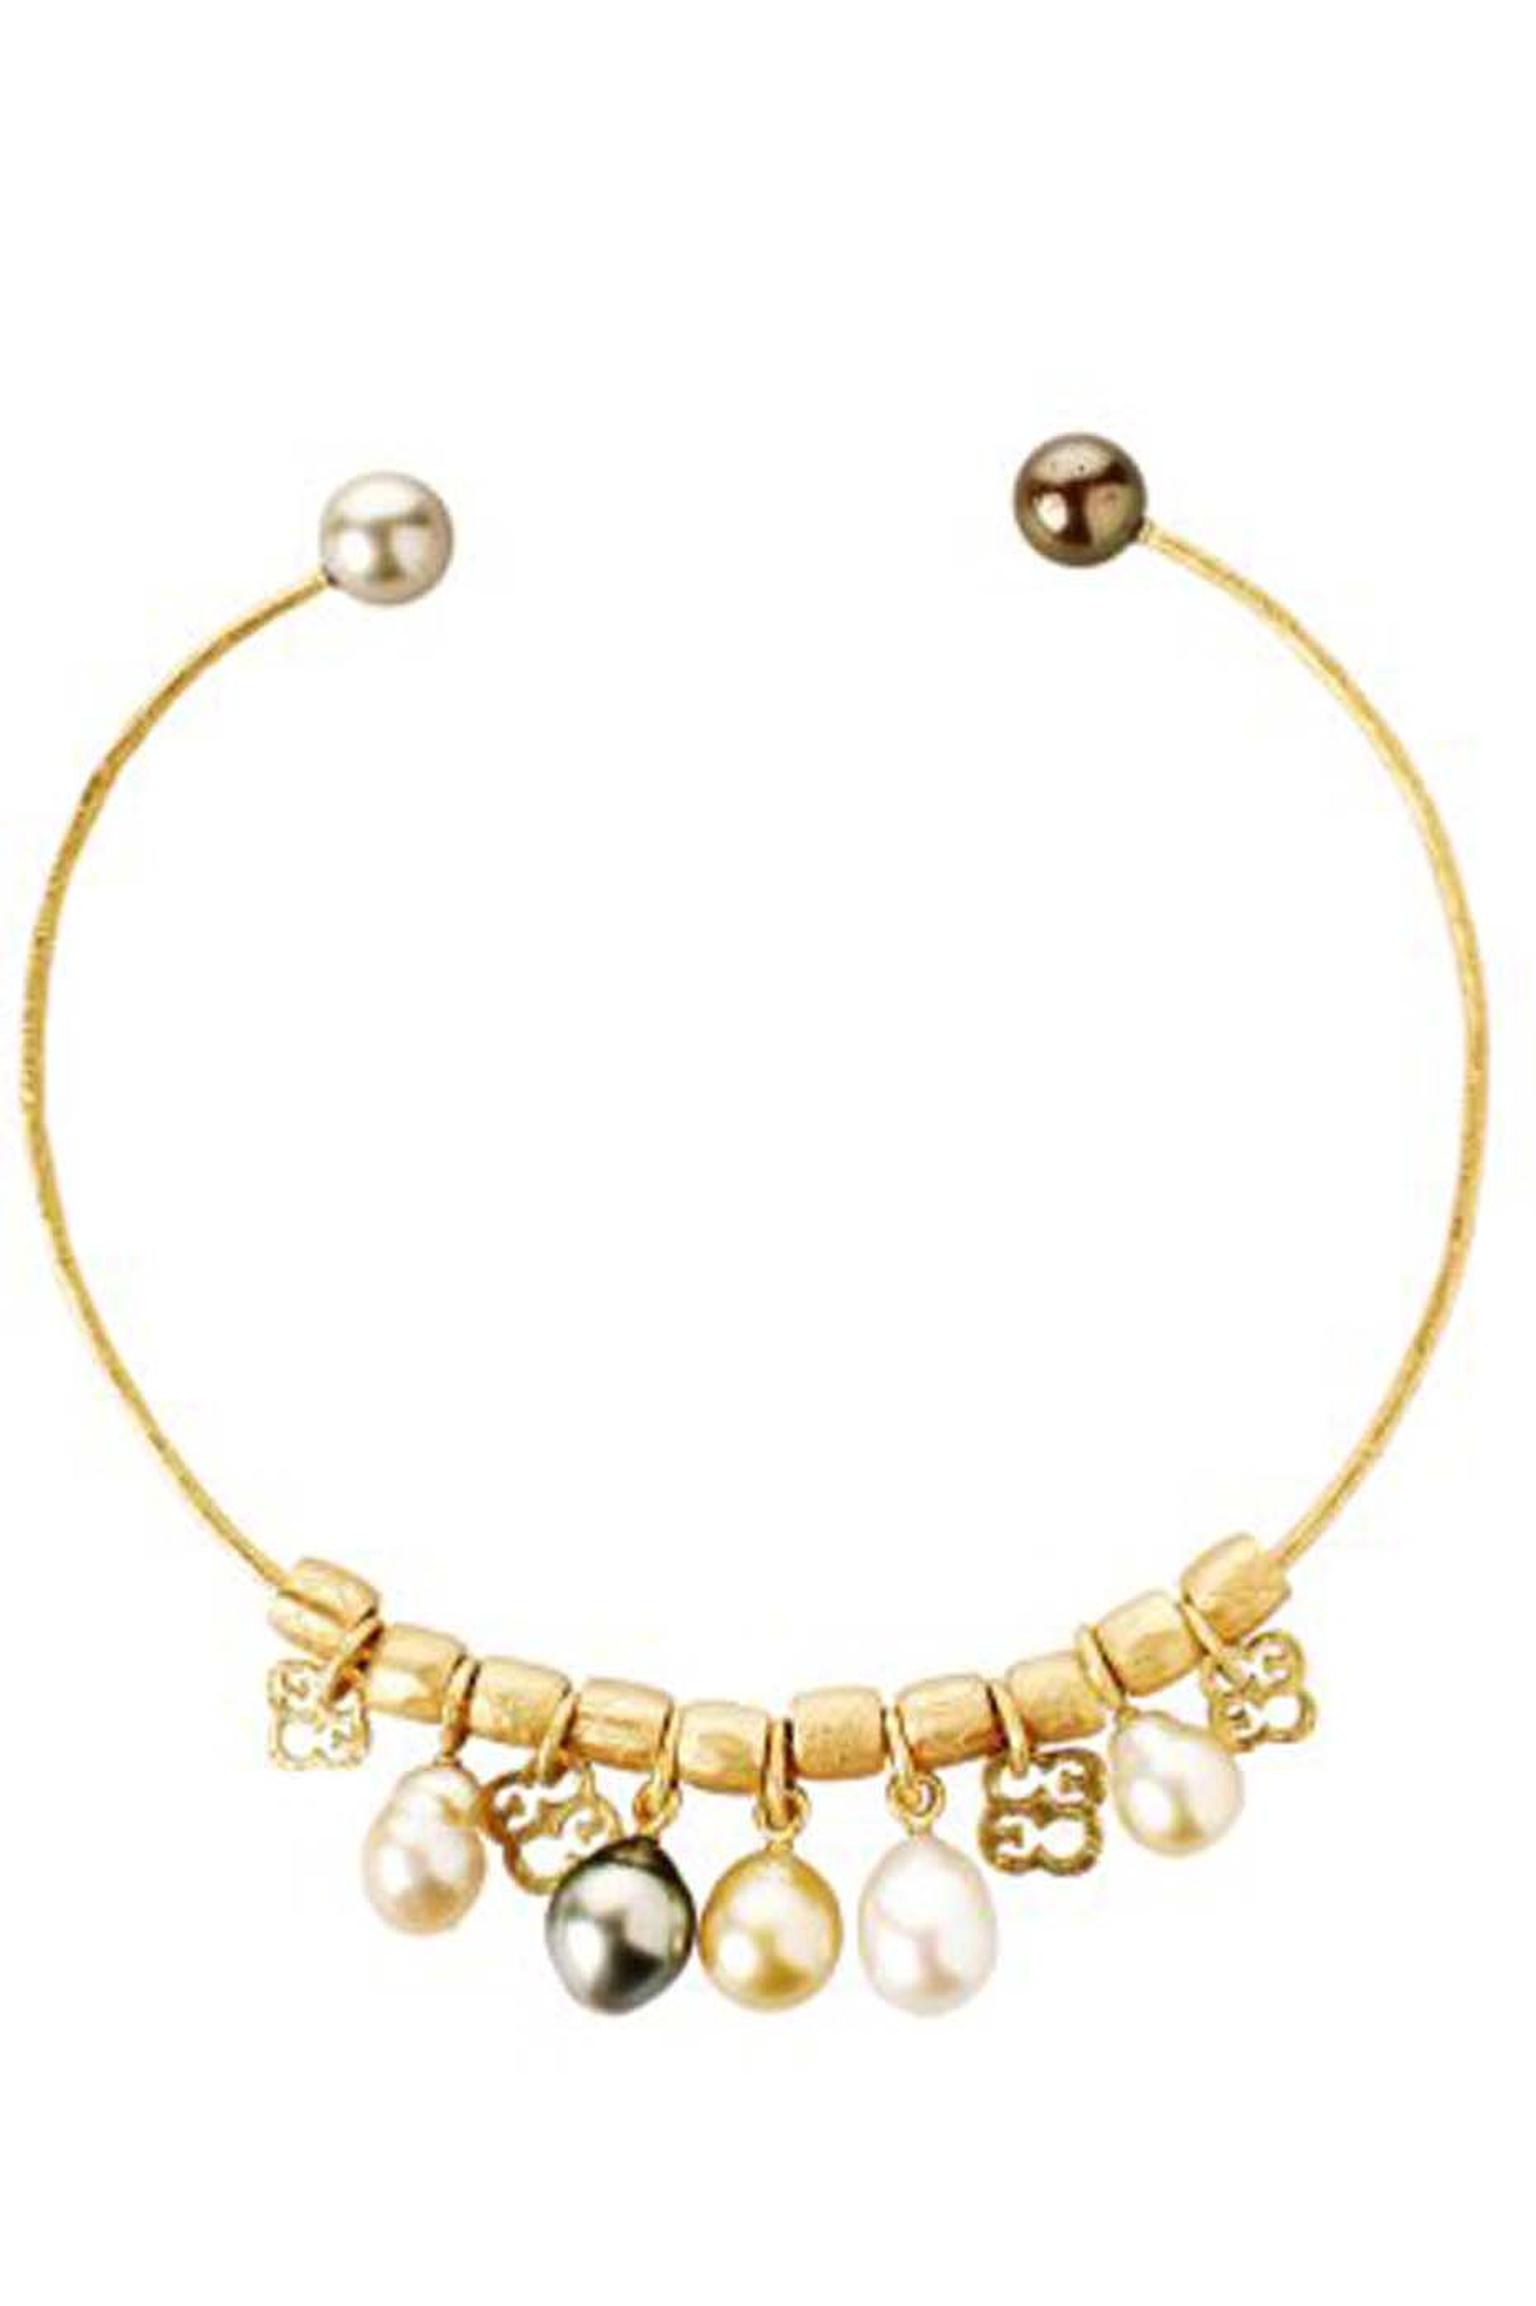 Elena Carrera yellow gold choker with pearls and charms (2,029€).